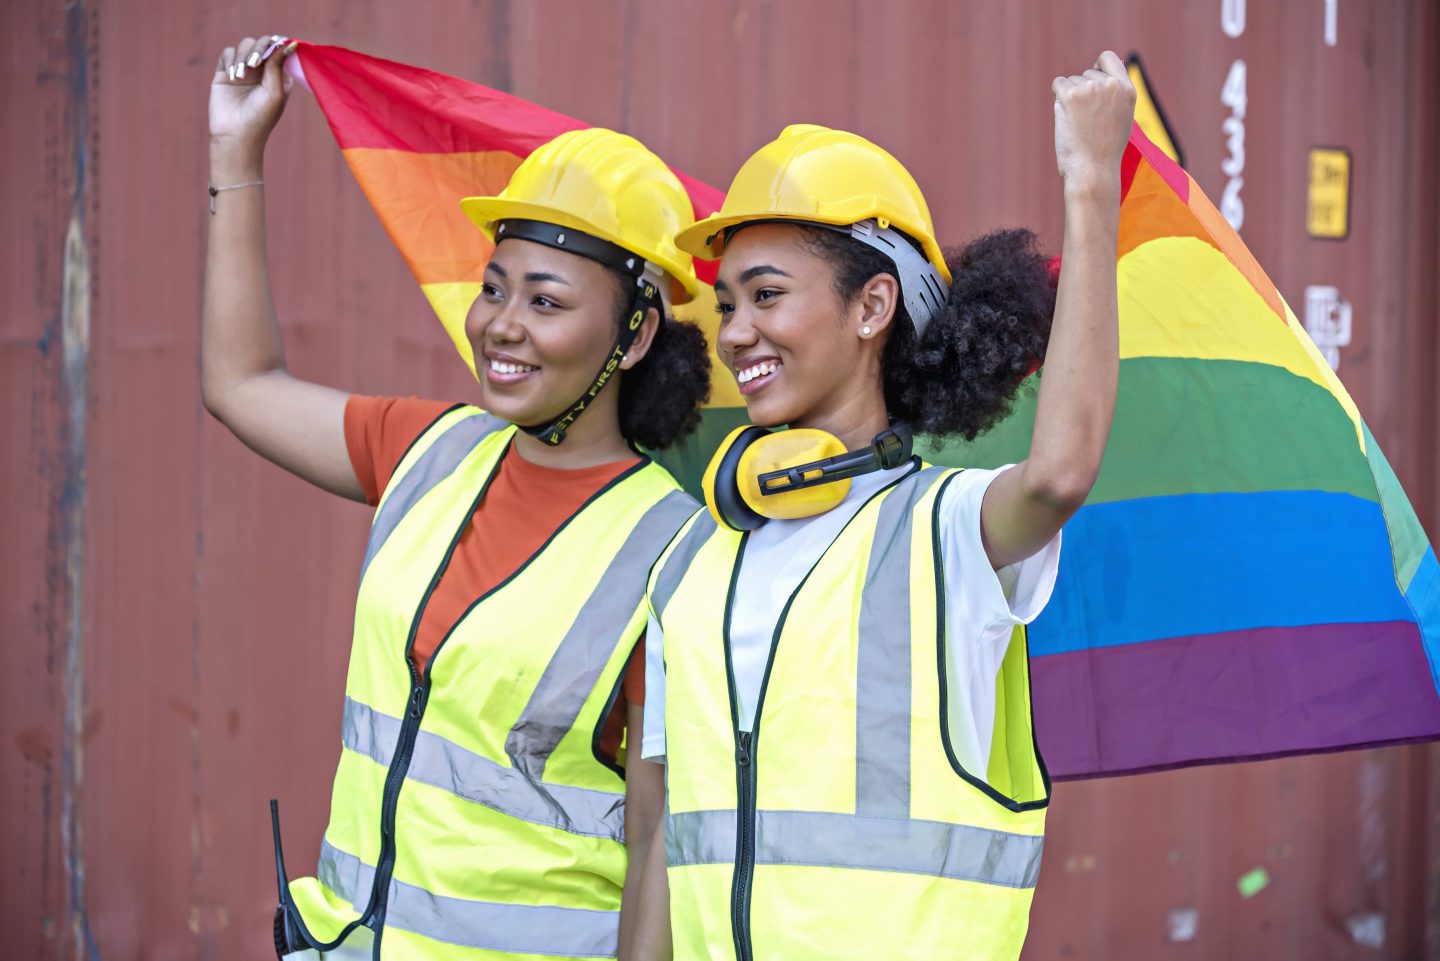 Two women wearing hard hats and reflective vests stand together holding a rainbow LGBTQ pride flag